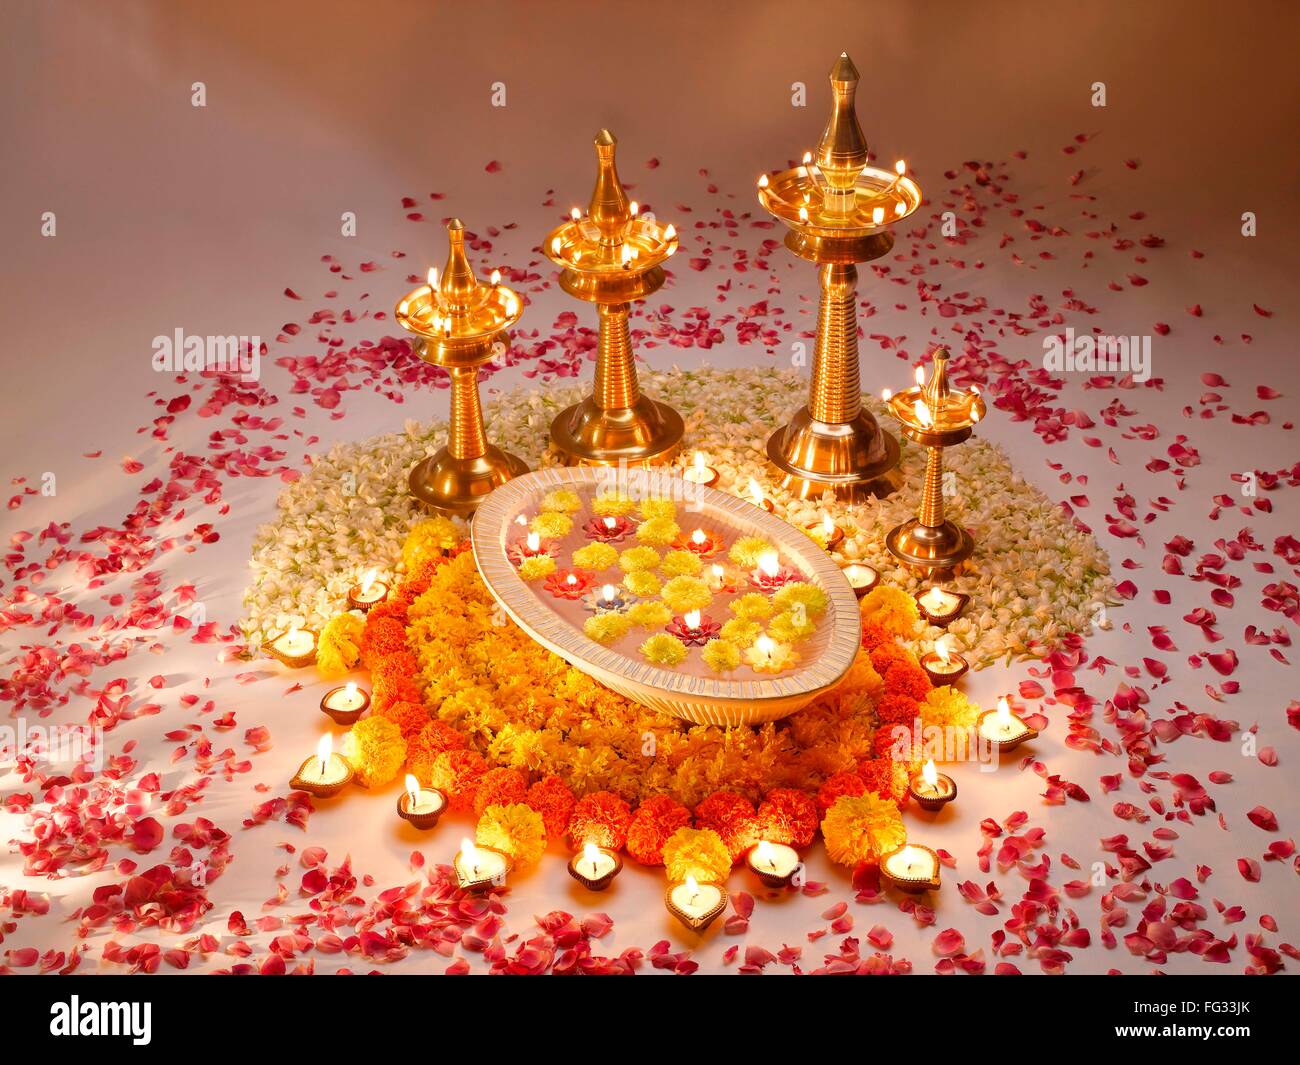 Diyas oil lamps and flowers arrangement for diwali festival ; India Stock Photo